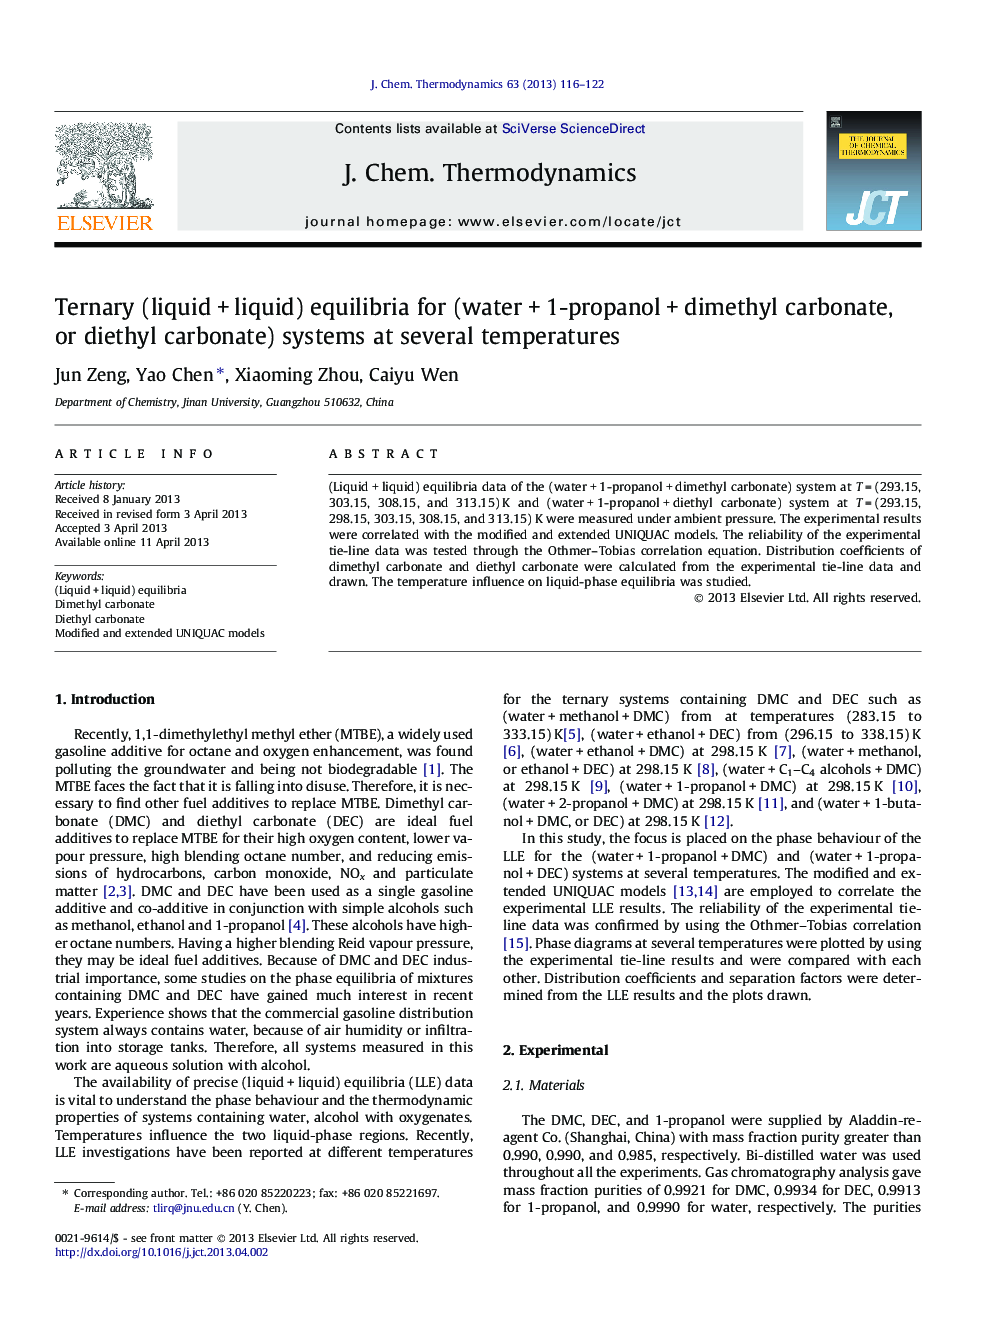 Ternary (liquid + liquid) equilibria for (water + 1-propanol + dimethyl carbonate, or diethyl carbonate) systems at several temperatures